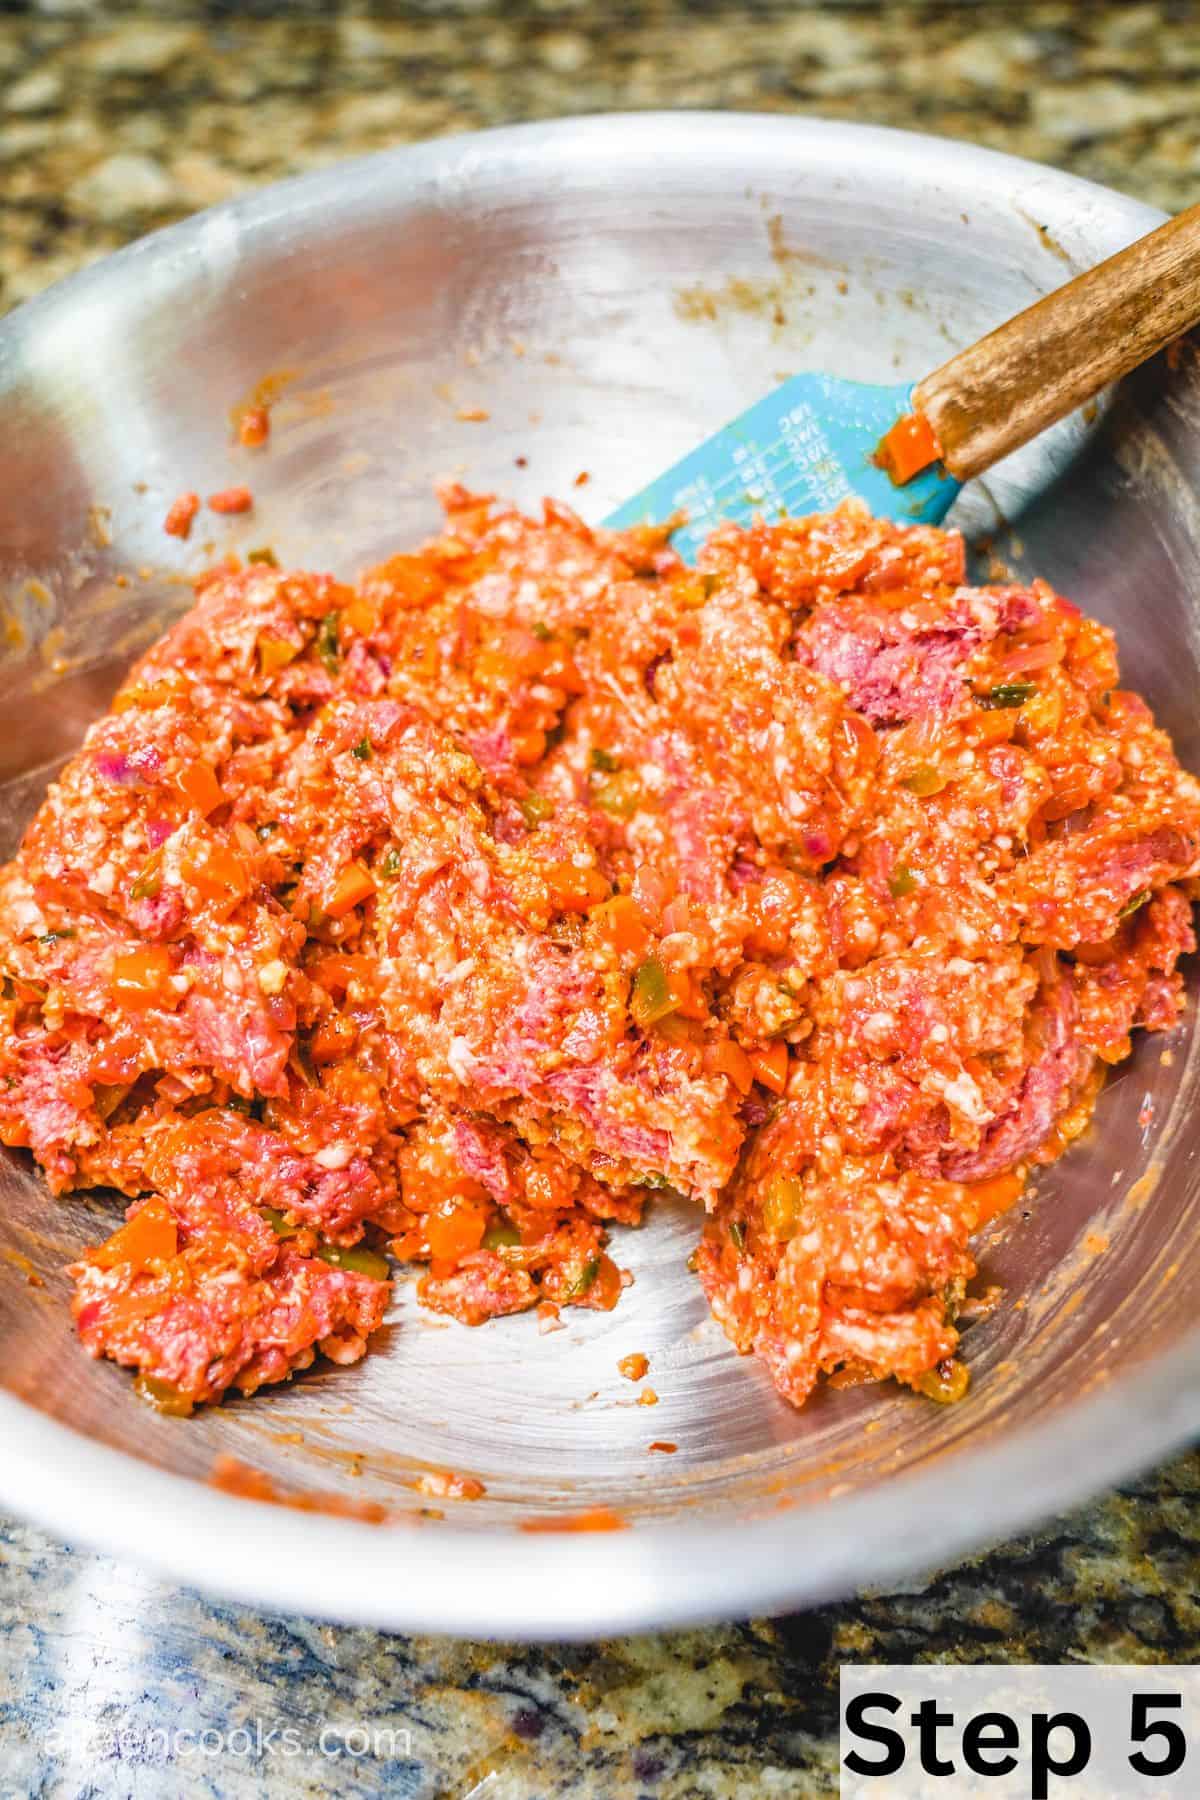 Meatloaf ingredients mixed together in a large metal mixing bowl.